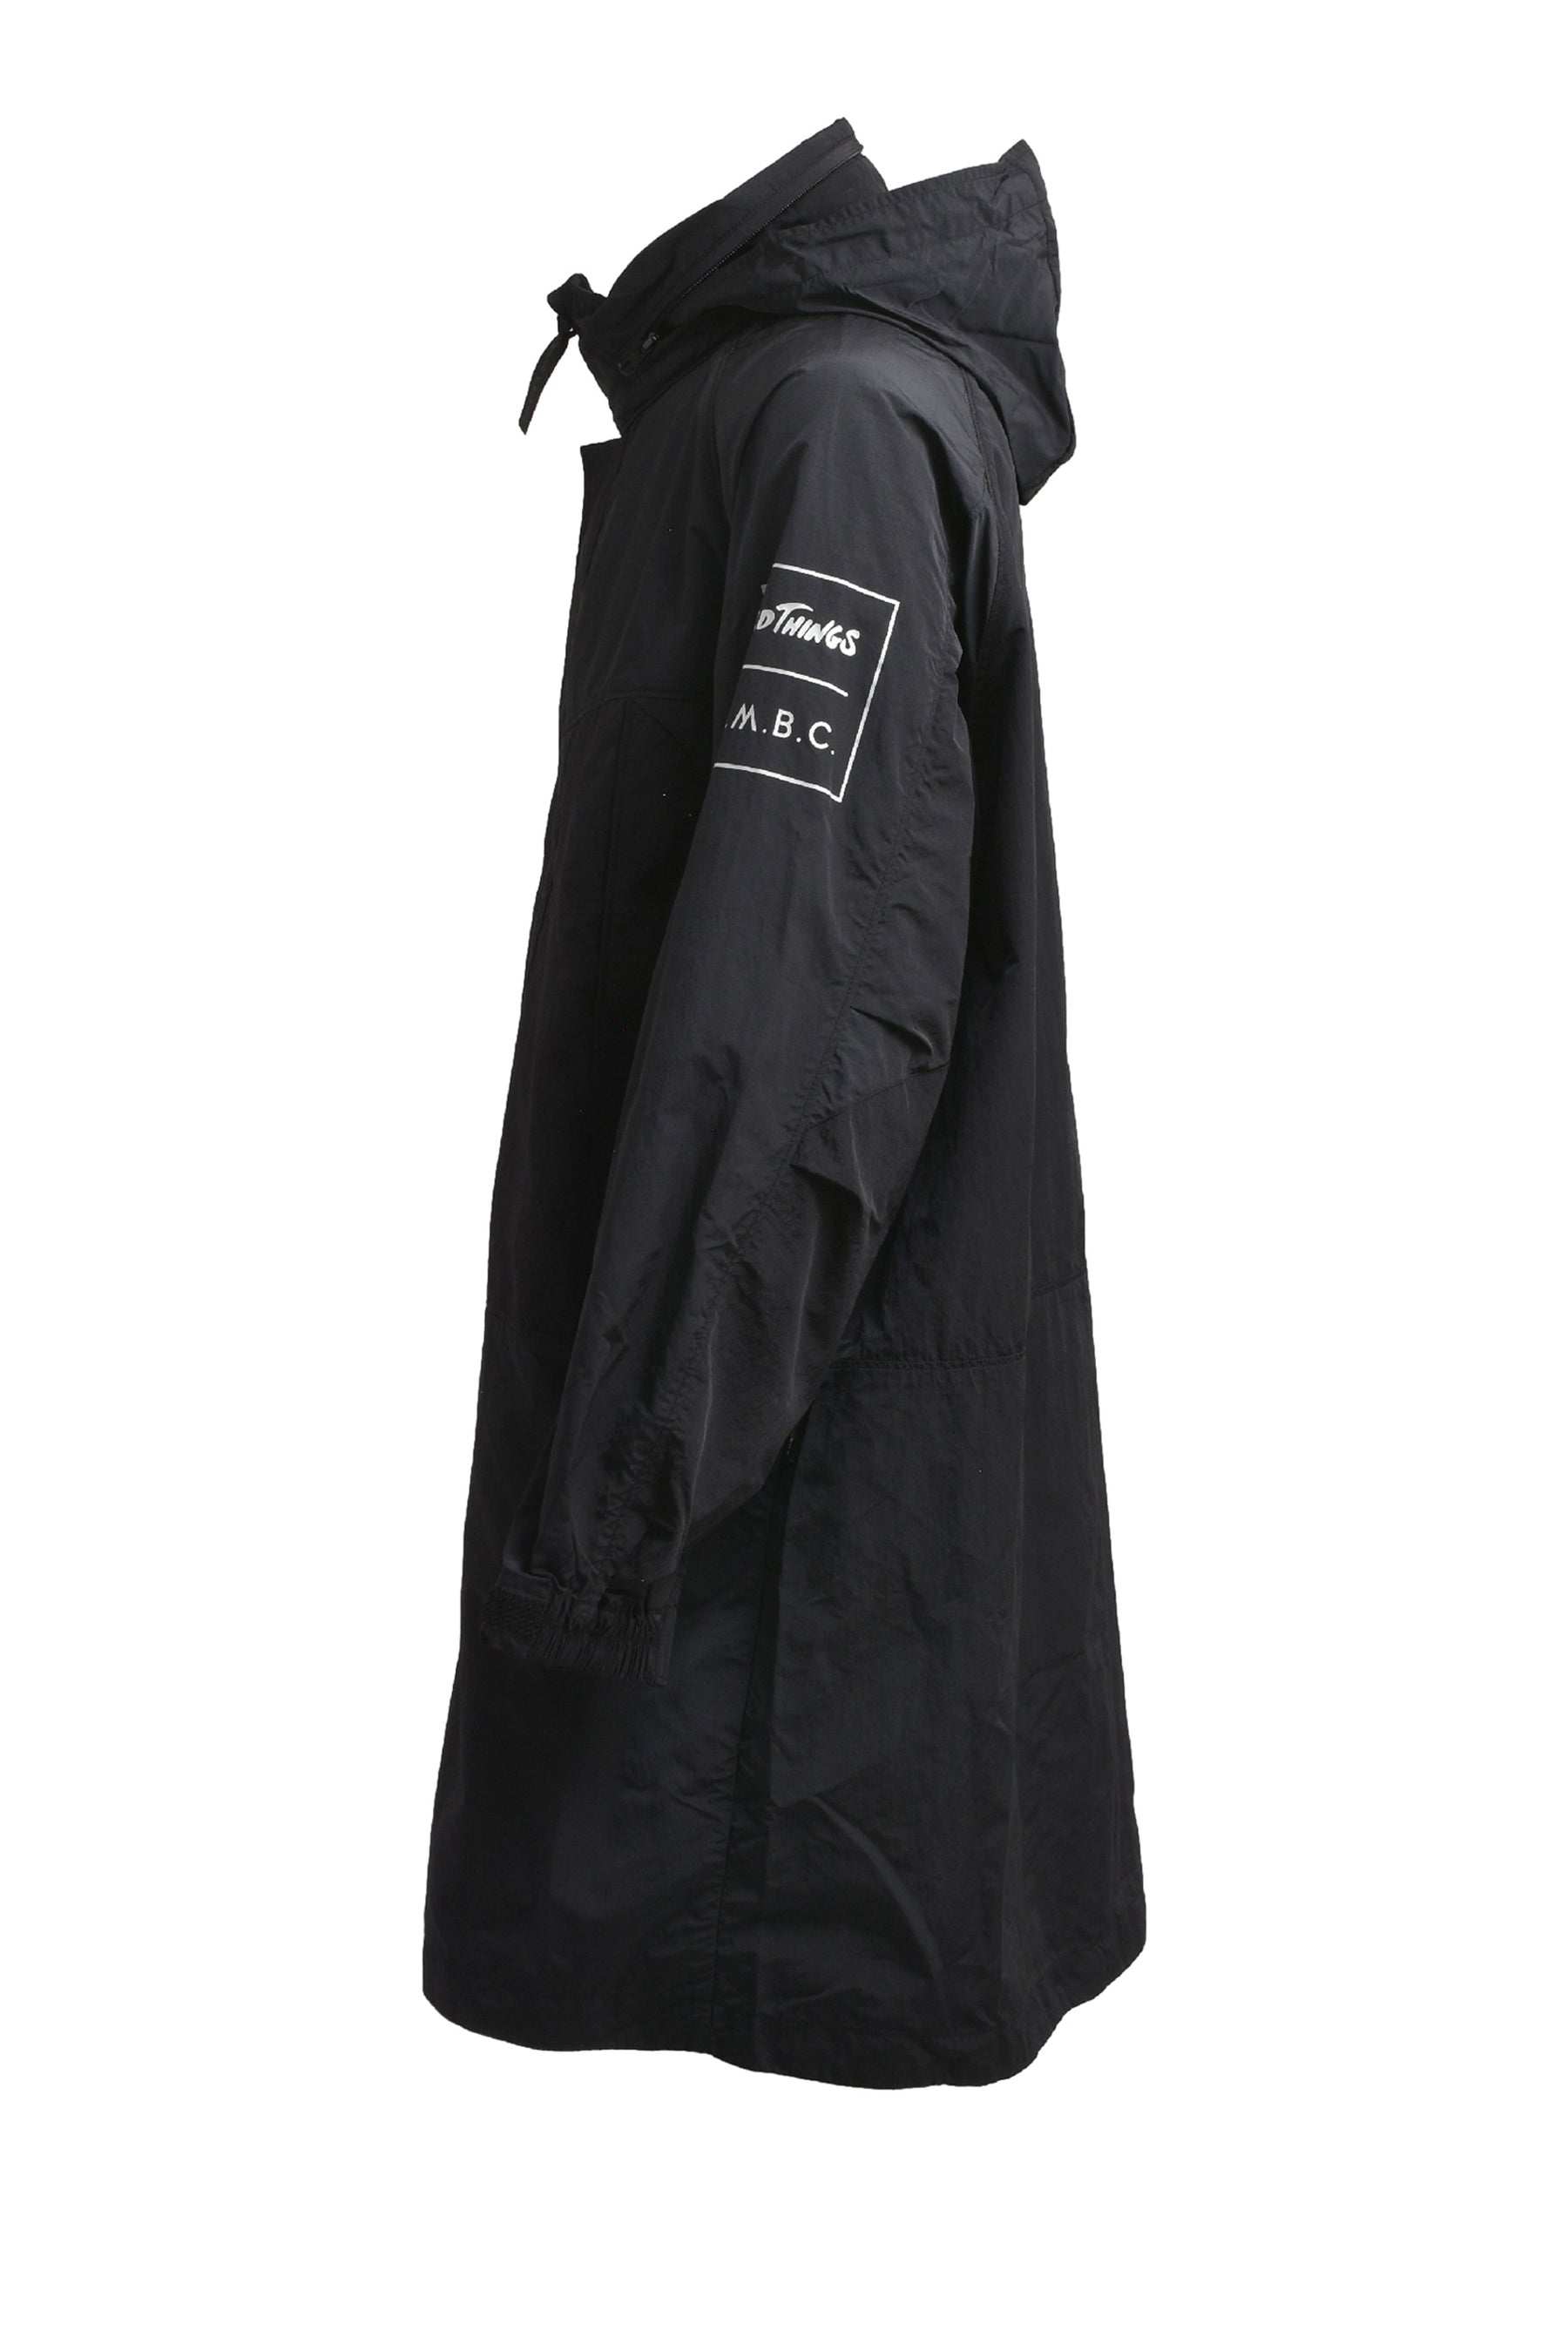 WM x WILDTHINGS 'MONSTER PARKA' / BLK